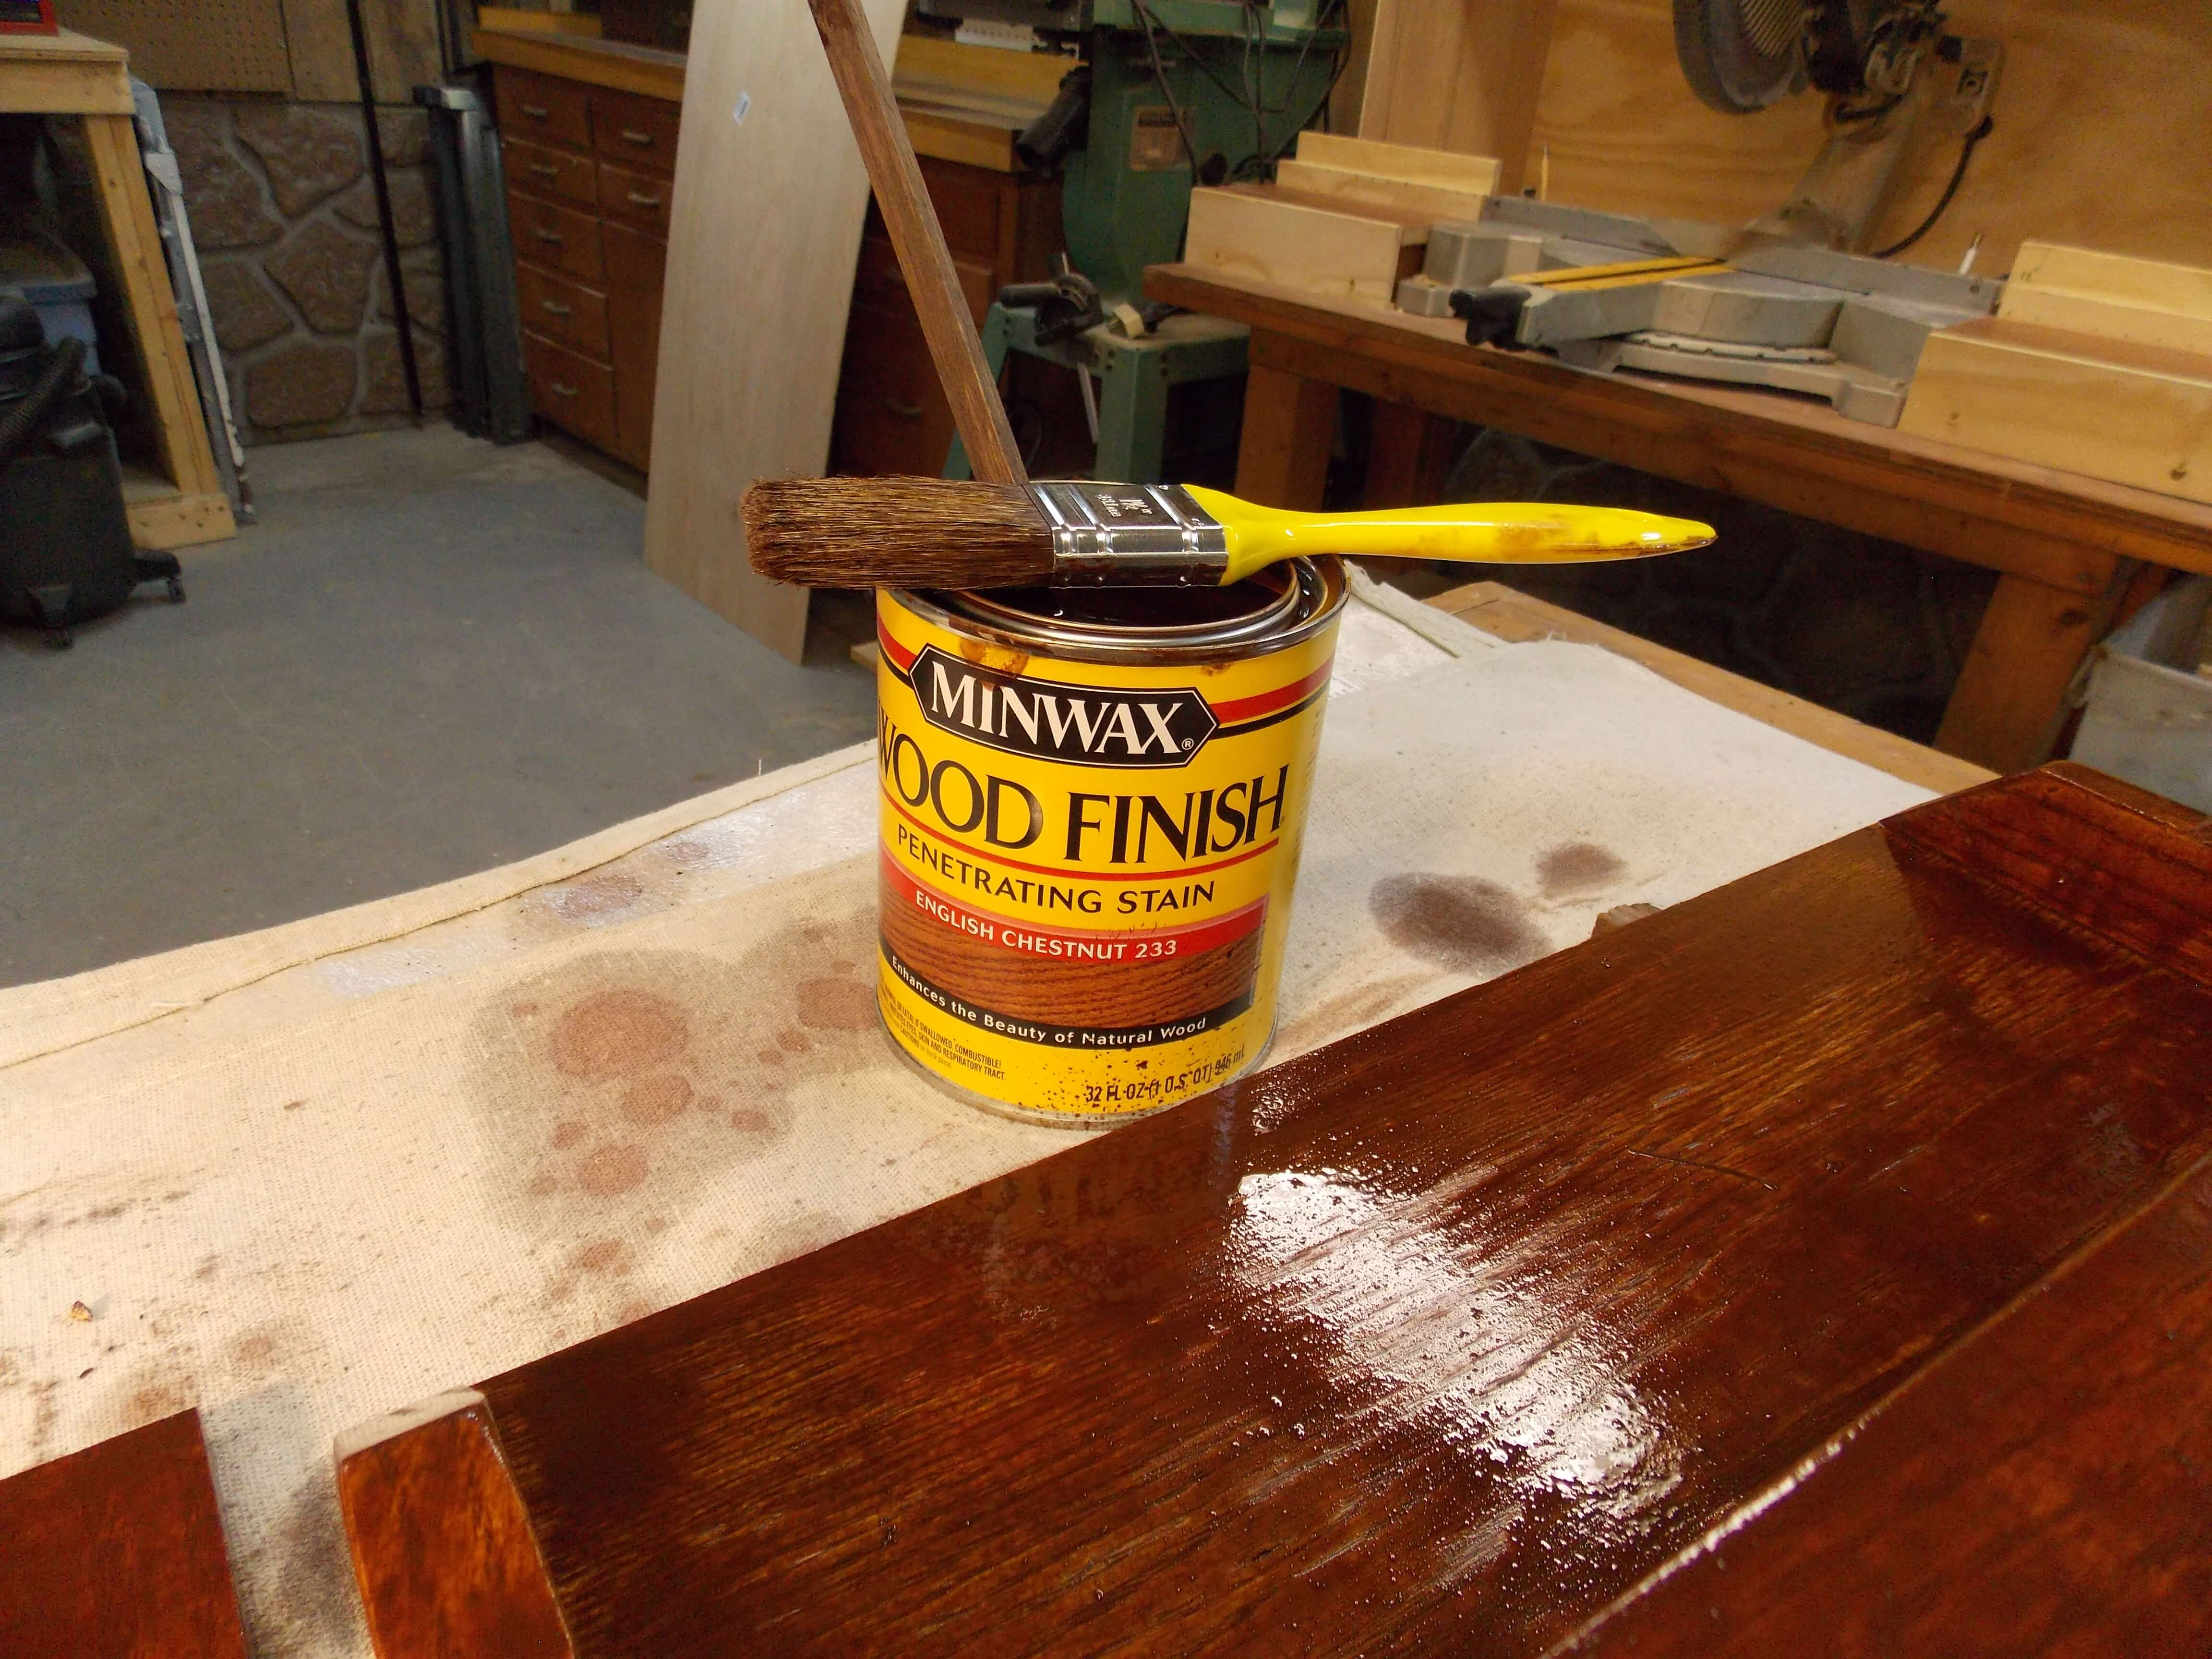 Brush on a coat of Minwax English Chestnut stain to achieve an Arts and Crafts look